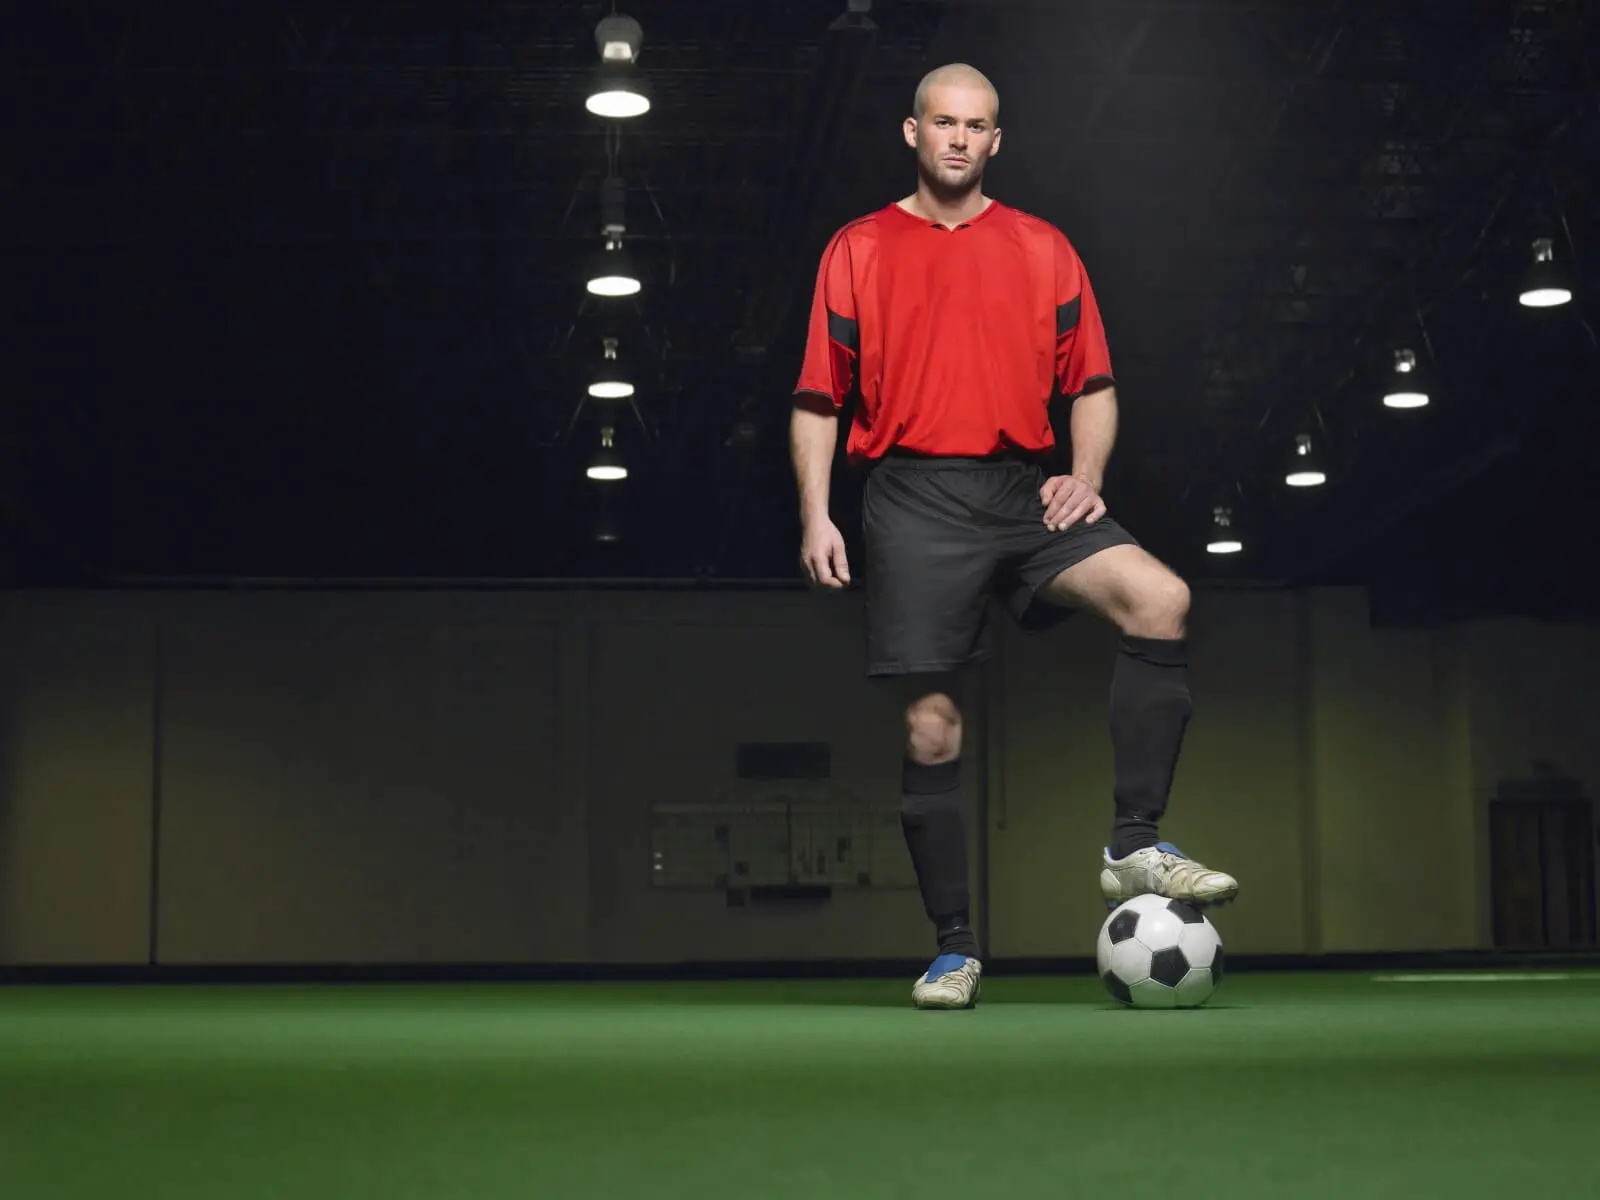 Man standing in indoor soccer arena with ball.